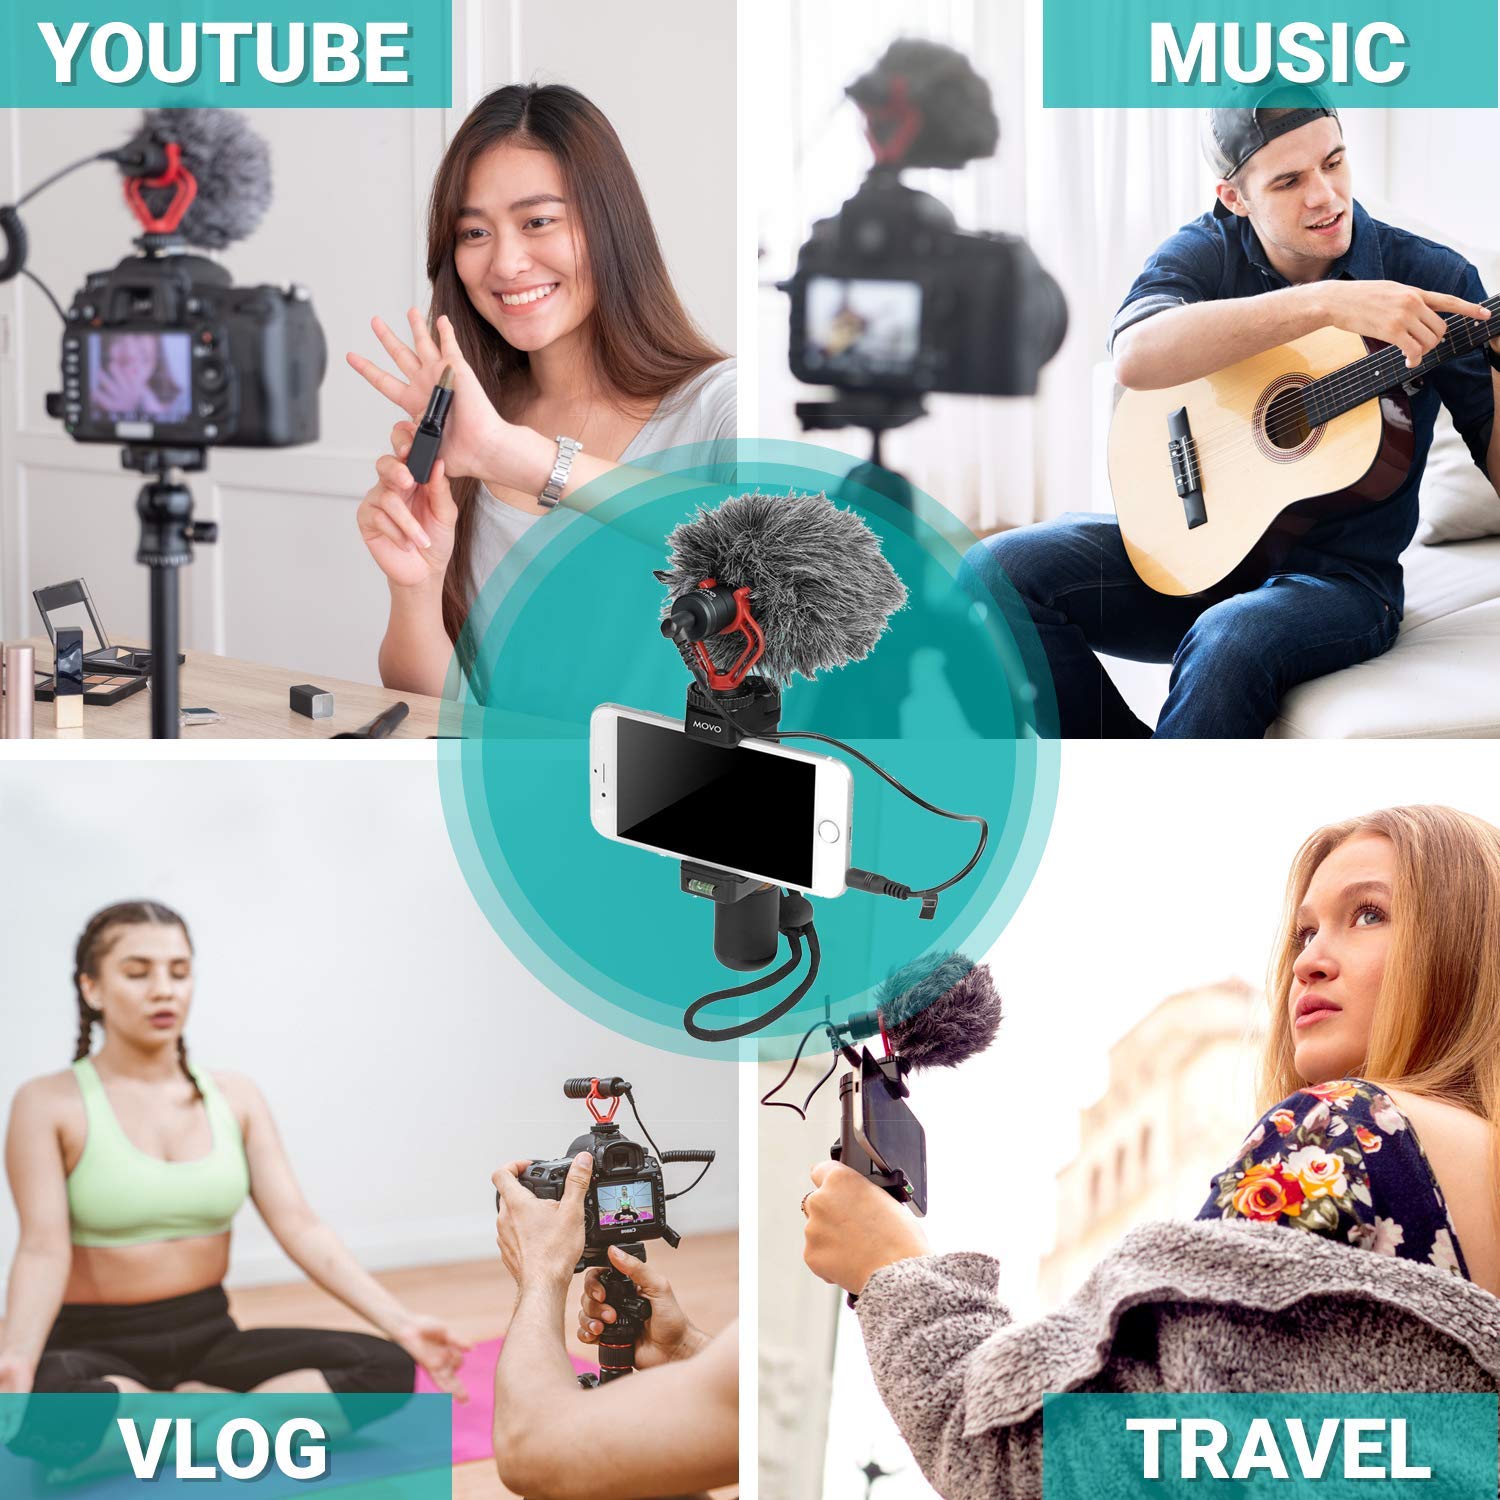 Movo Smartphone Vlogging Kit for iPhone with Shotgun Microphone, Grip Handle, Wrist Strap for iPhone and Android Smartphones for TIK Tok, Vlog, YouTube Starter Kit and Content Creator Kit  - Good